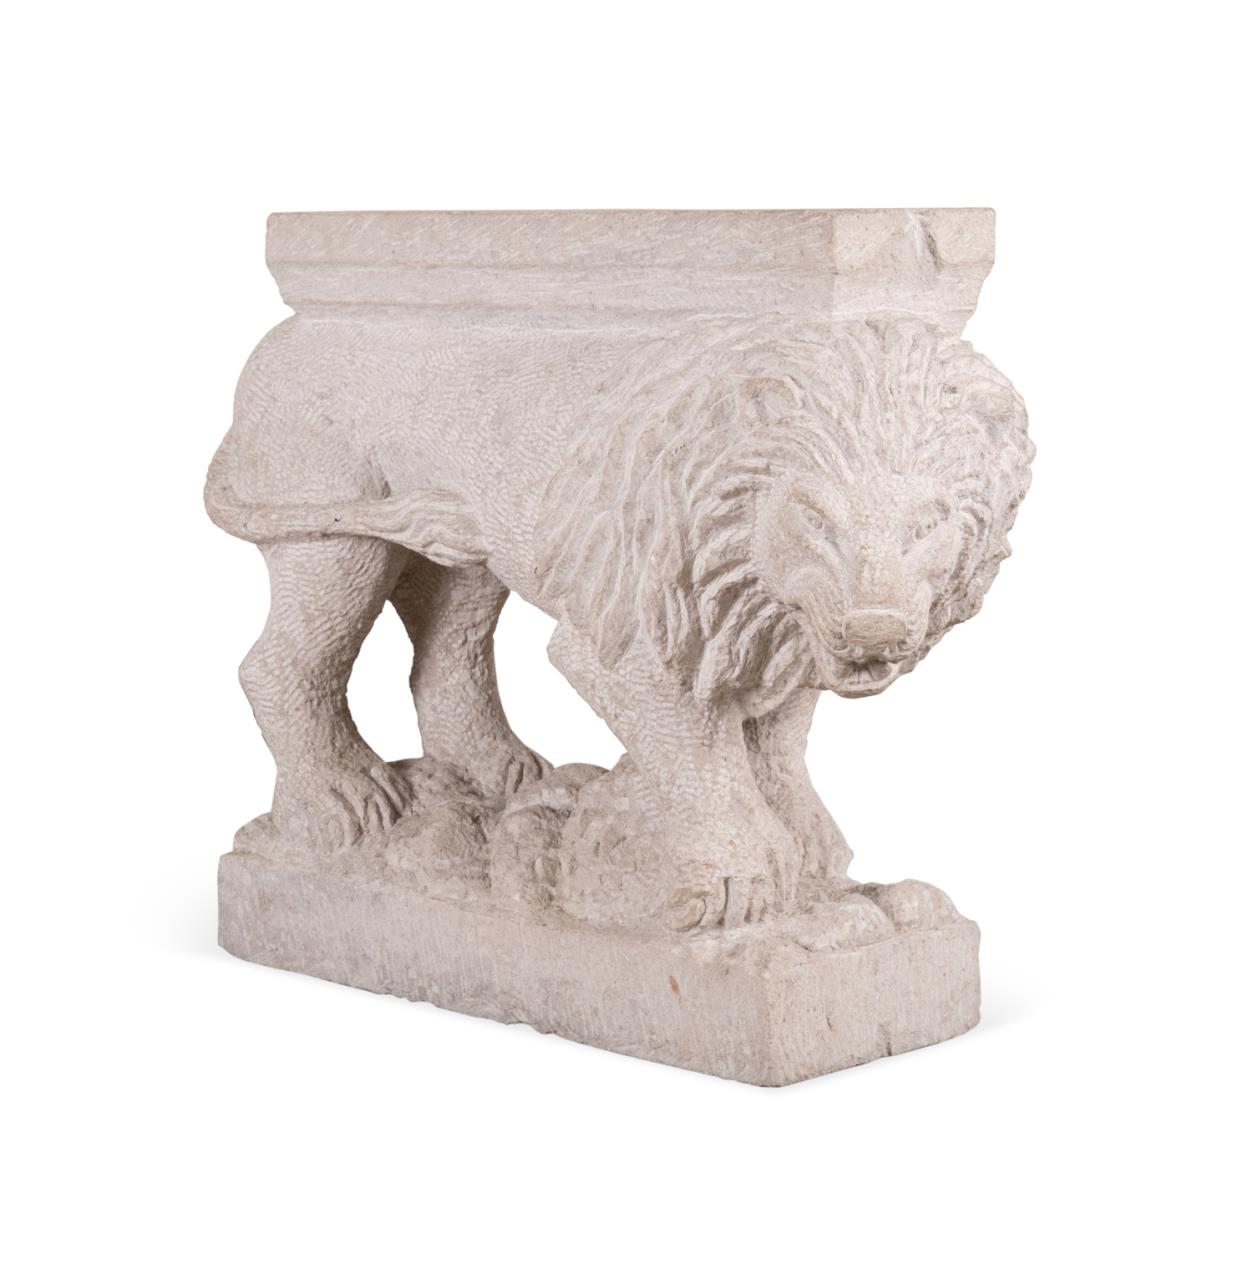 MEDIEVAL STYLE CARVED STONE LION 2f9862